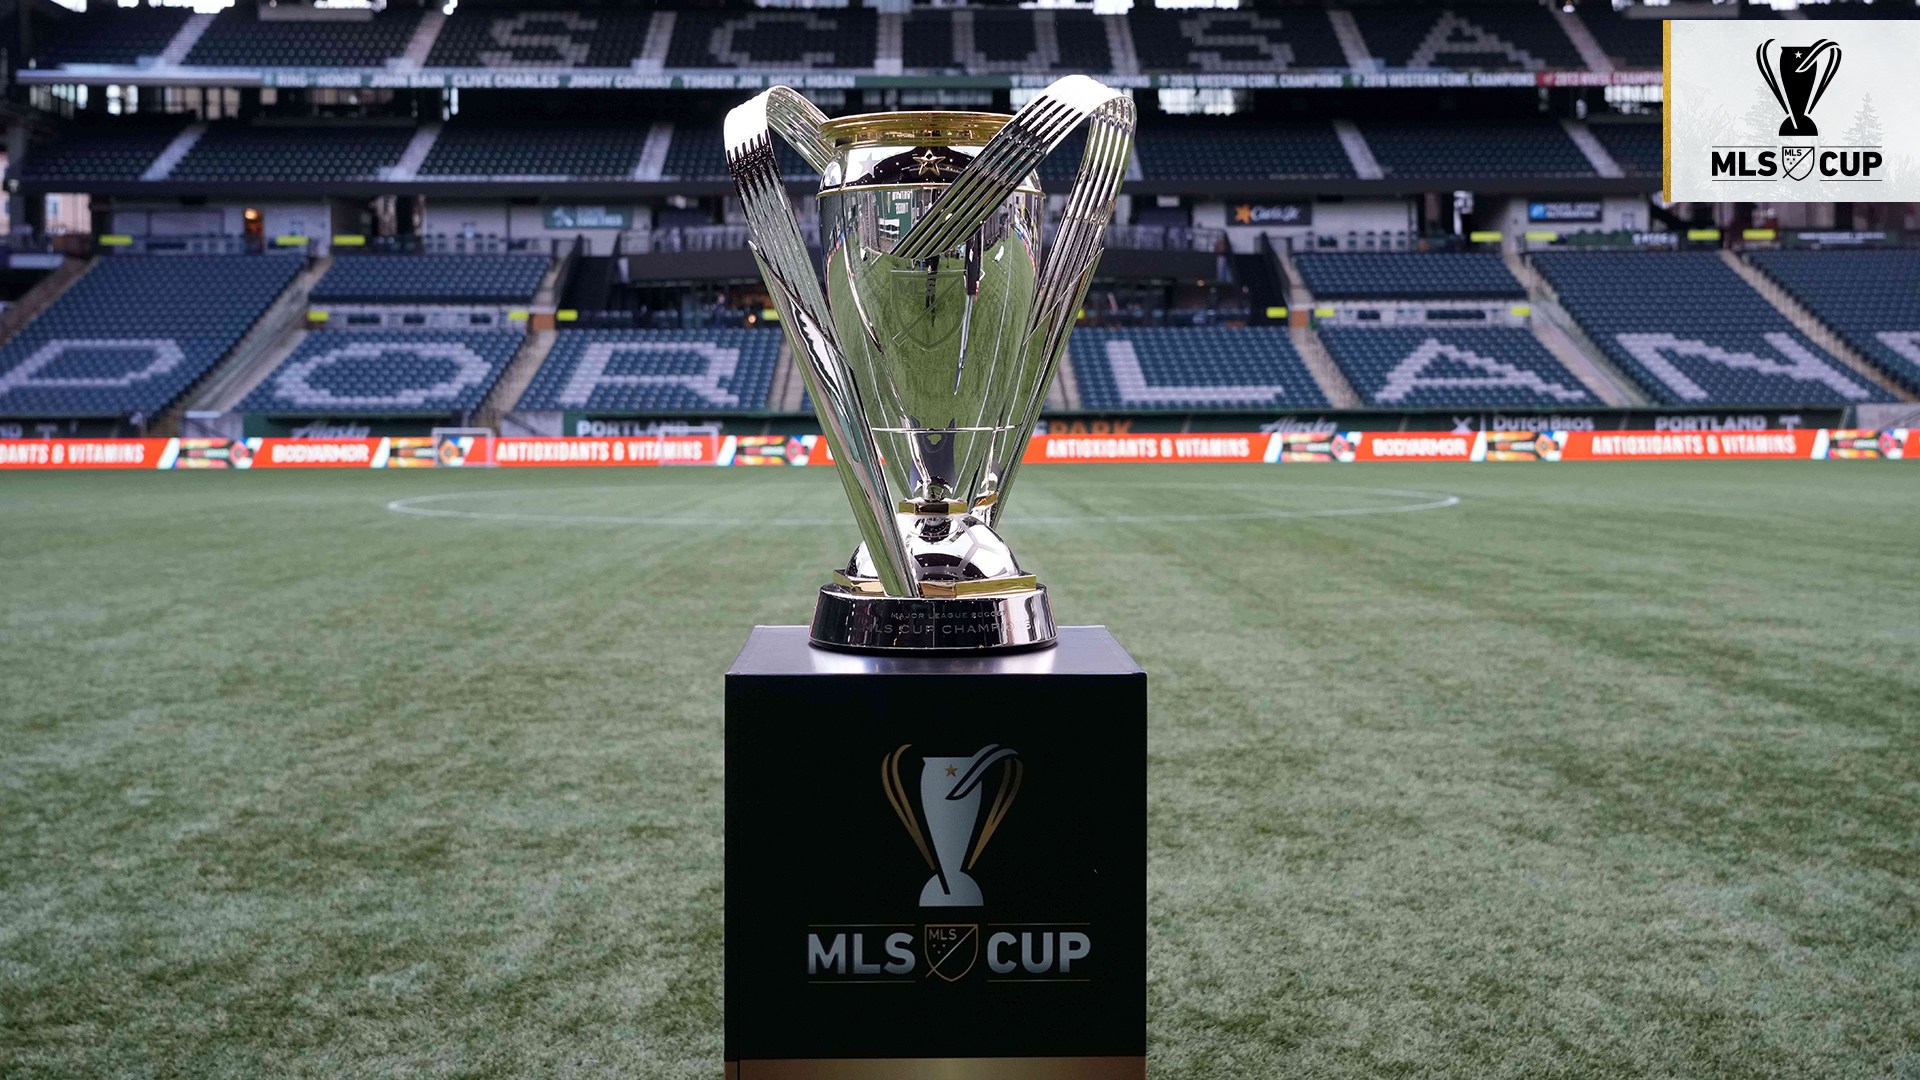 By The Numbers | A look at the unique elements of the MLS Cup trophy | PTFC